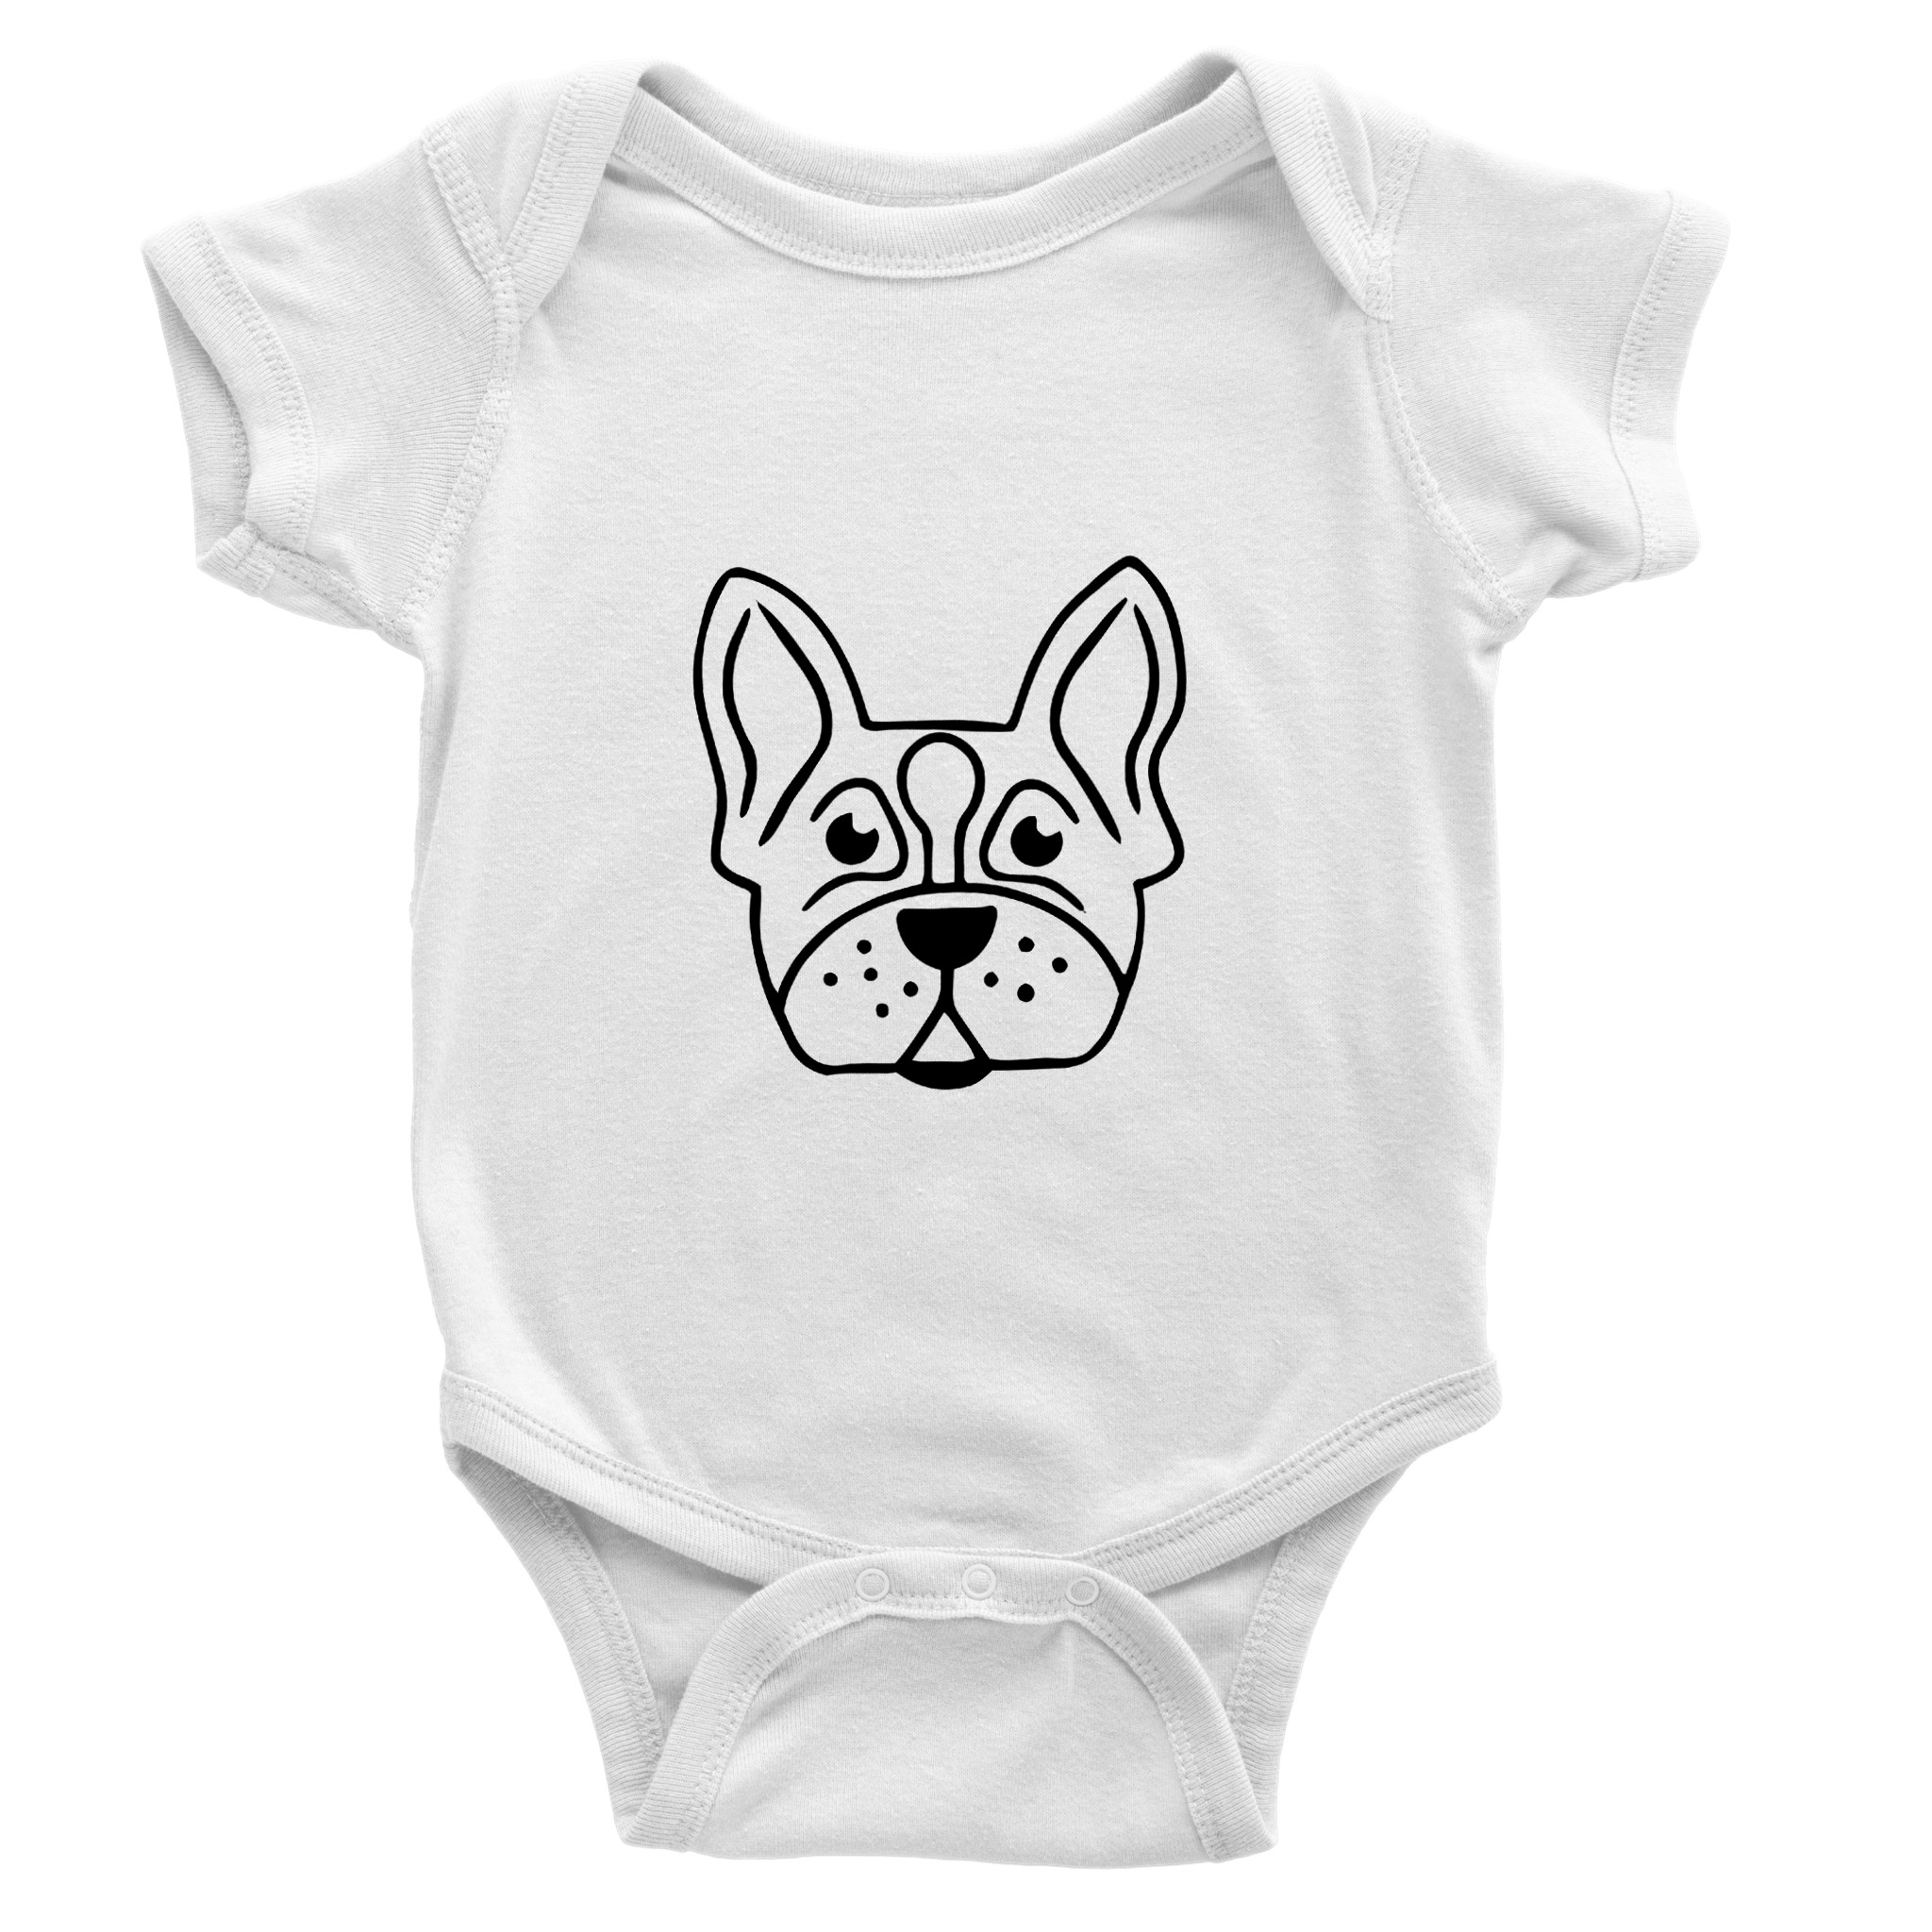 Baby Dog face short sleeve romper suit